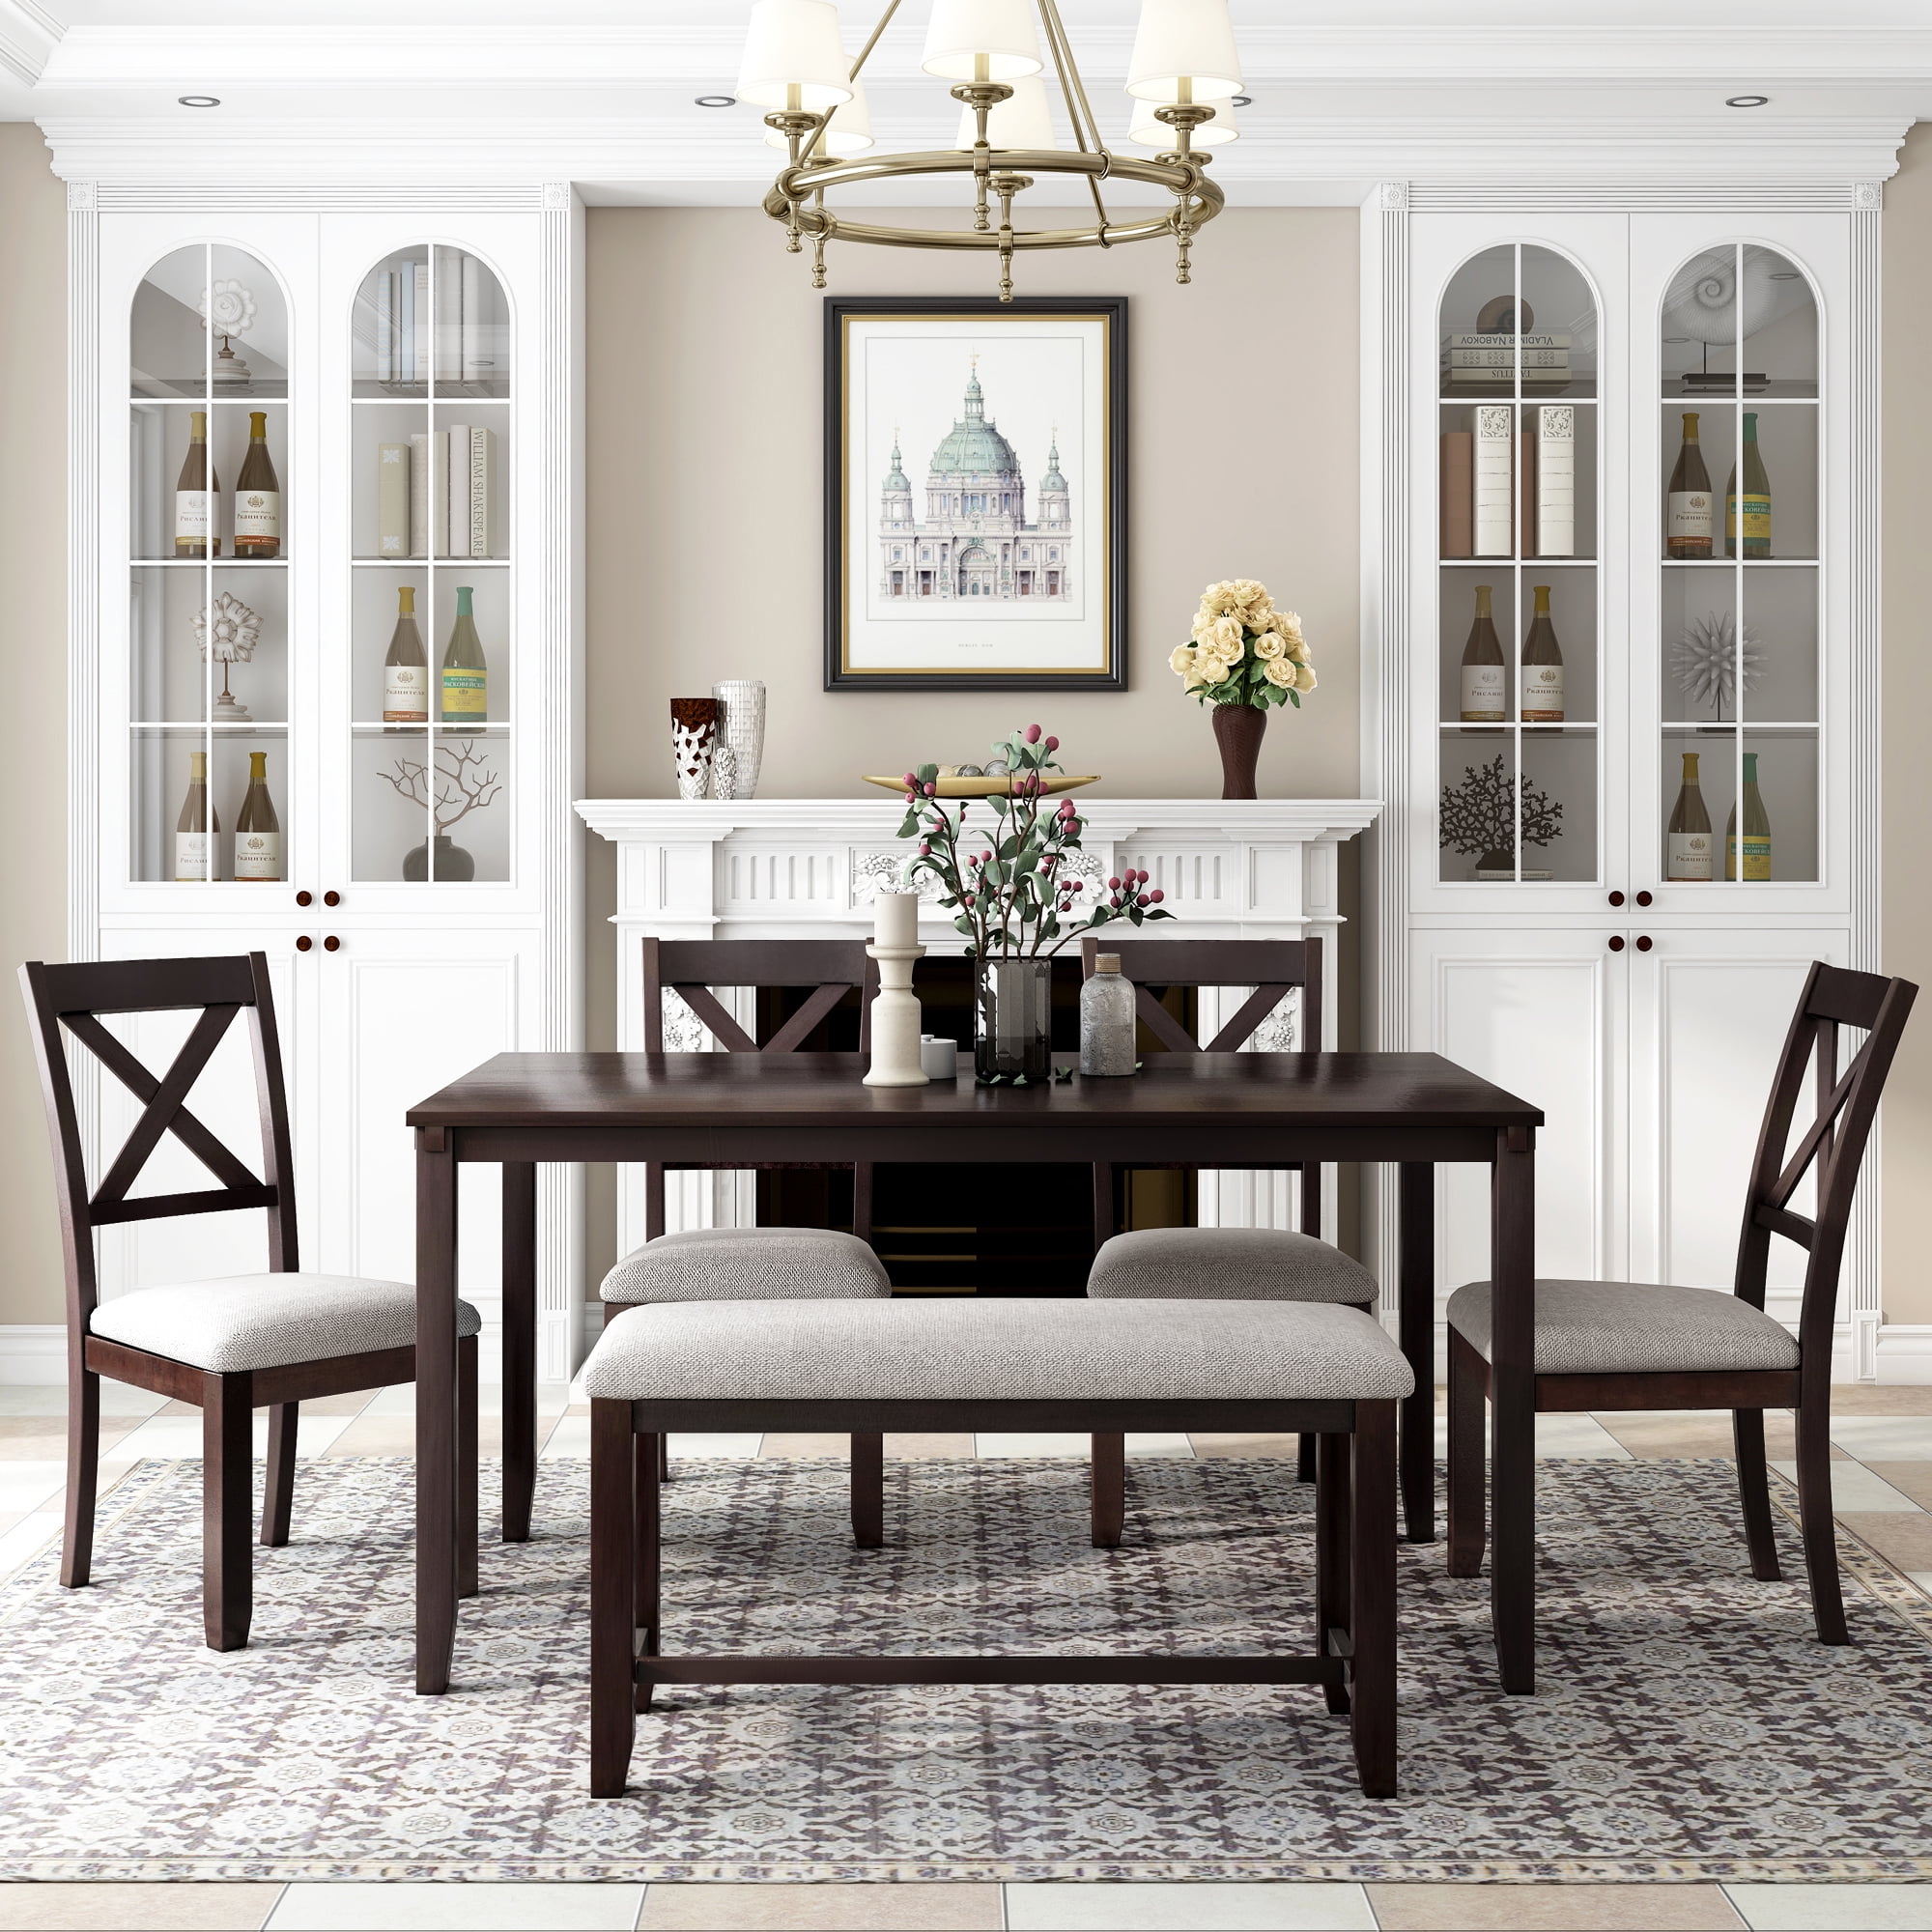 Rustic Style Dining Table, Apartment Dining Room Tables And Chairs For 6